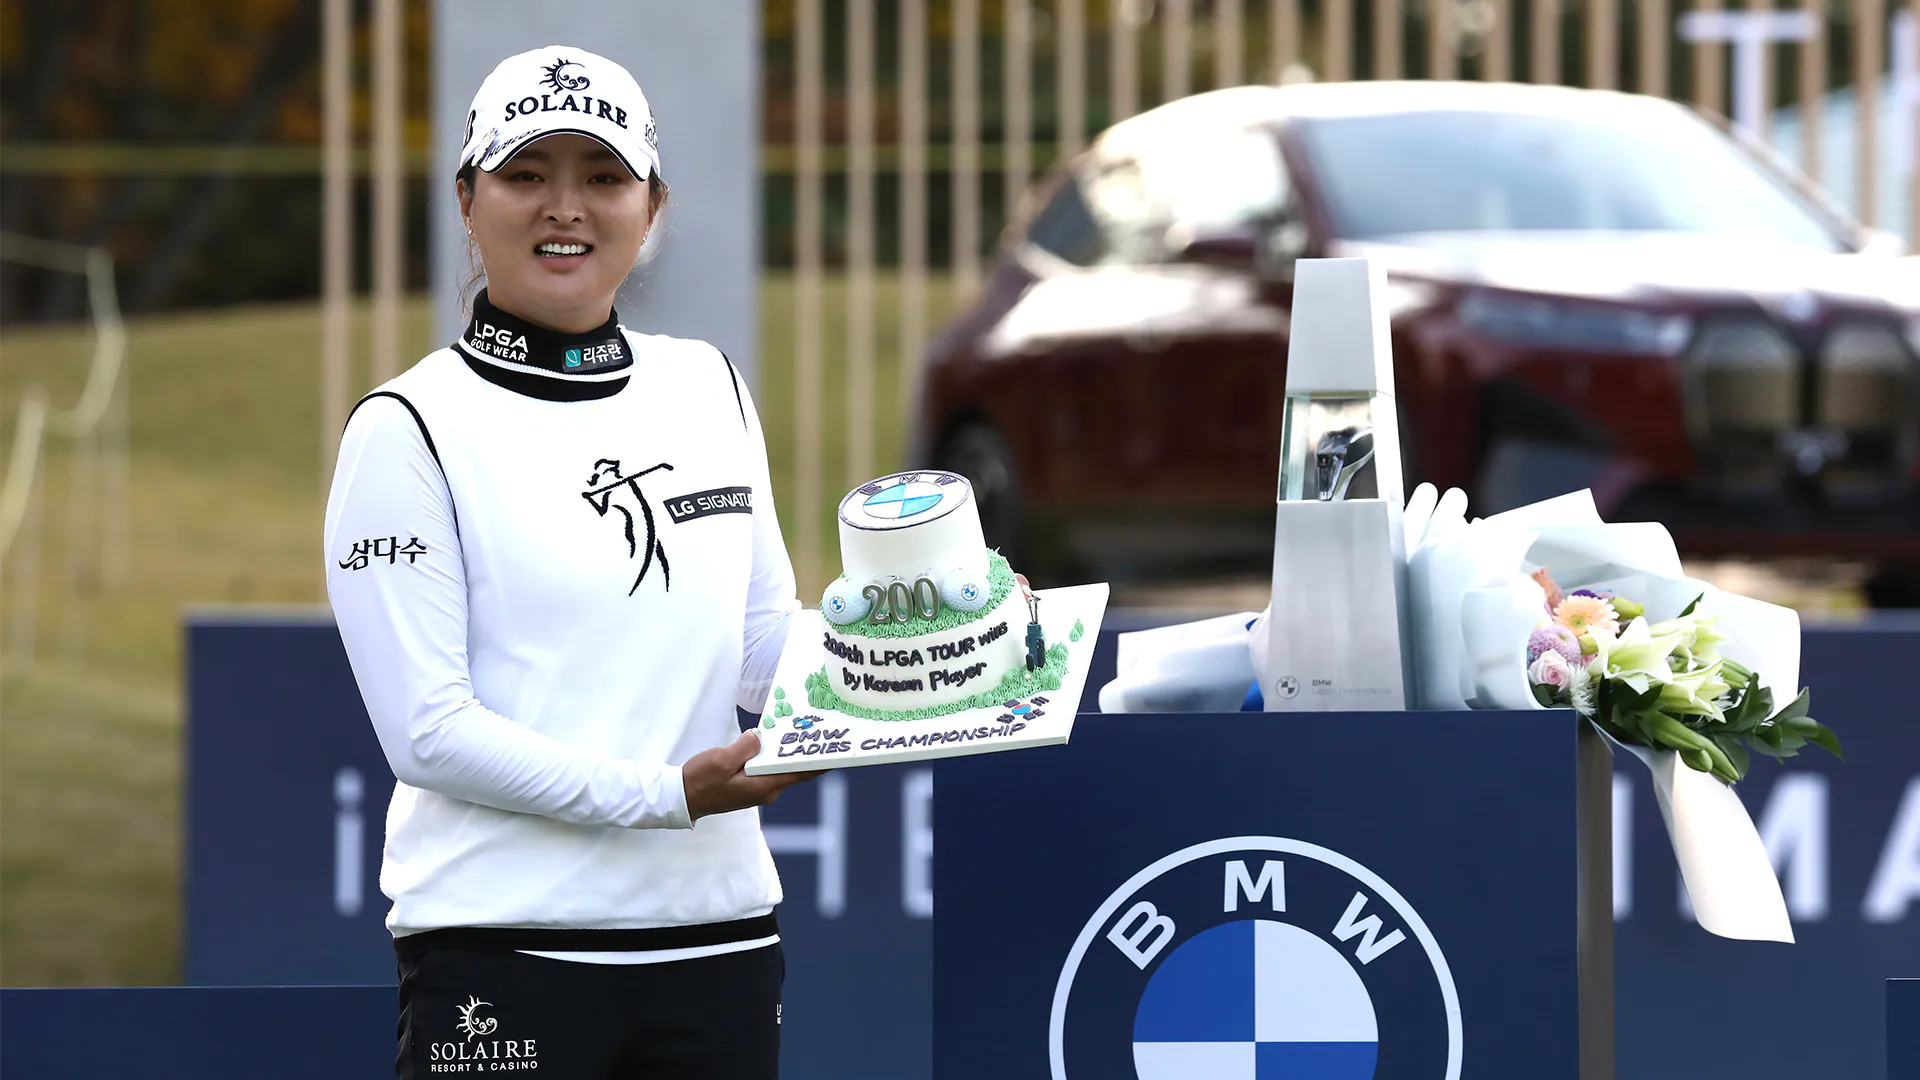 At BMW Ladies Champ., Jin Young Ko notches 200th win on LPGA by South Korean